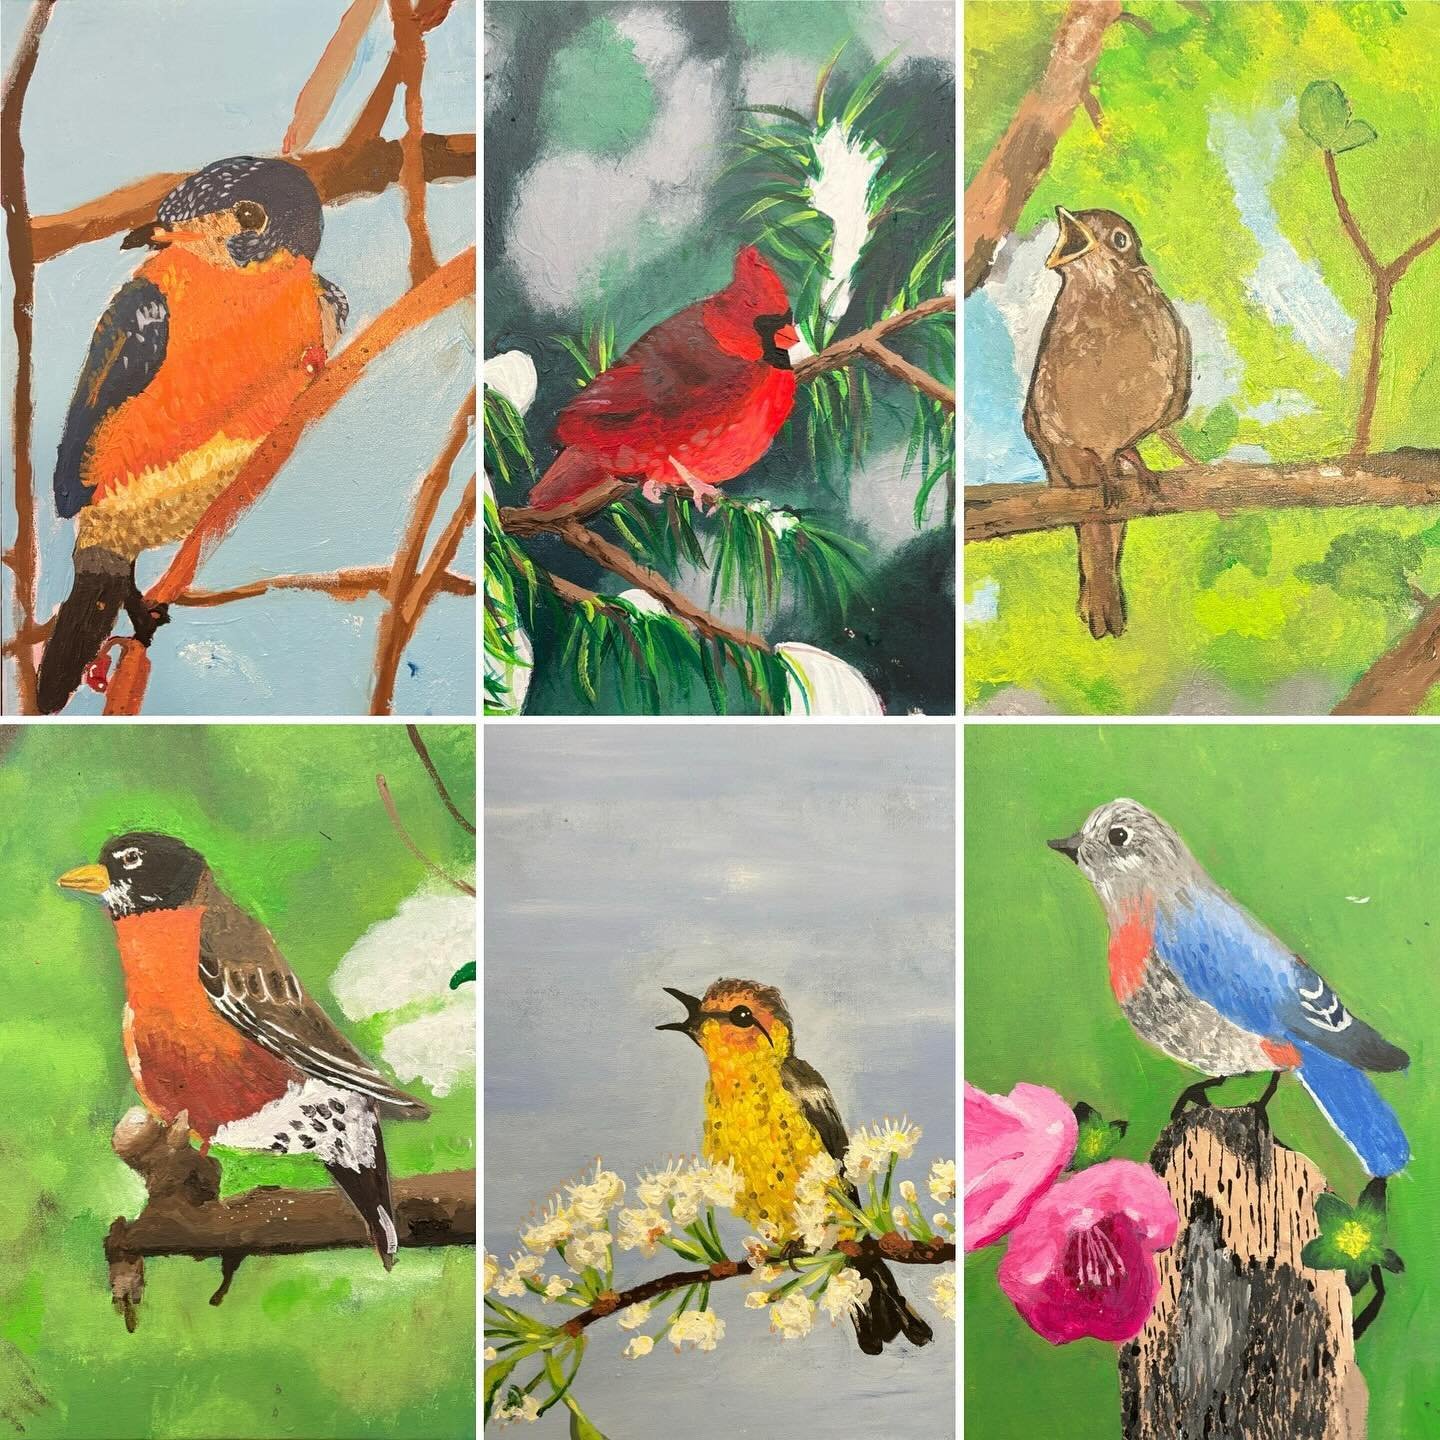 This year, our Tuesday #ArtFundamentals class has been sticking to an &ldquo;avian theme&rdquo; for our acrylic projects. In the fall, we painted roosters and hens. In the winter, we painted chickadees. In the spring, we each chose our own bird refer